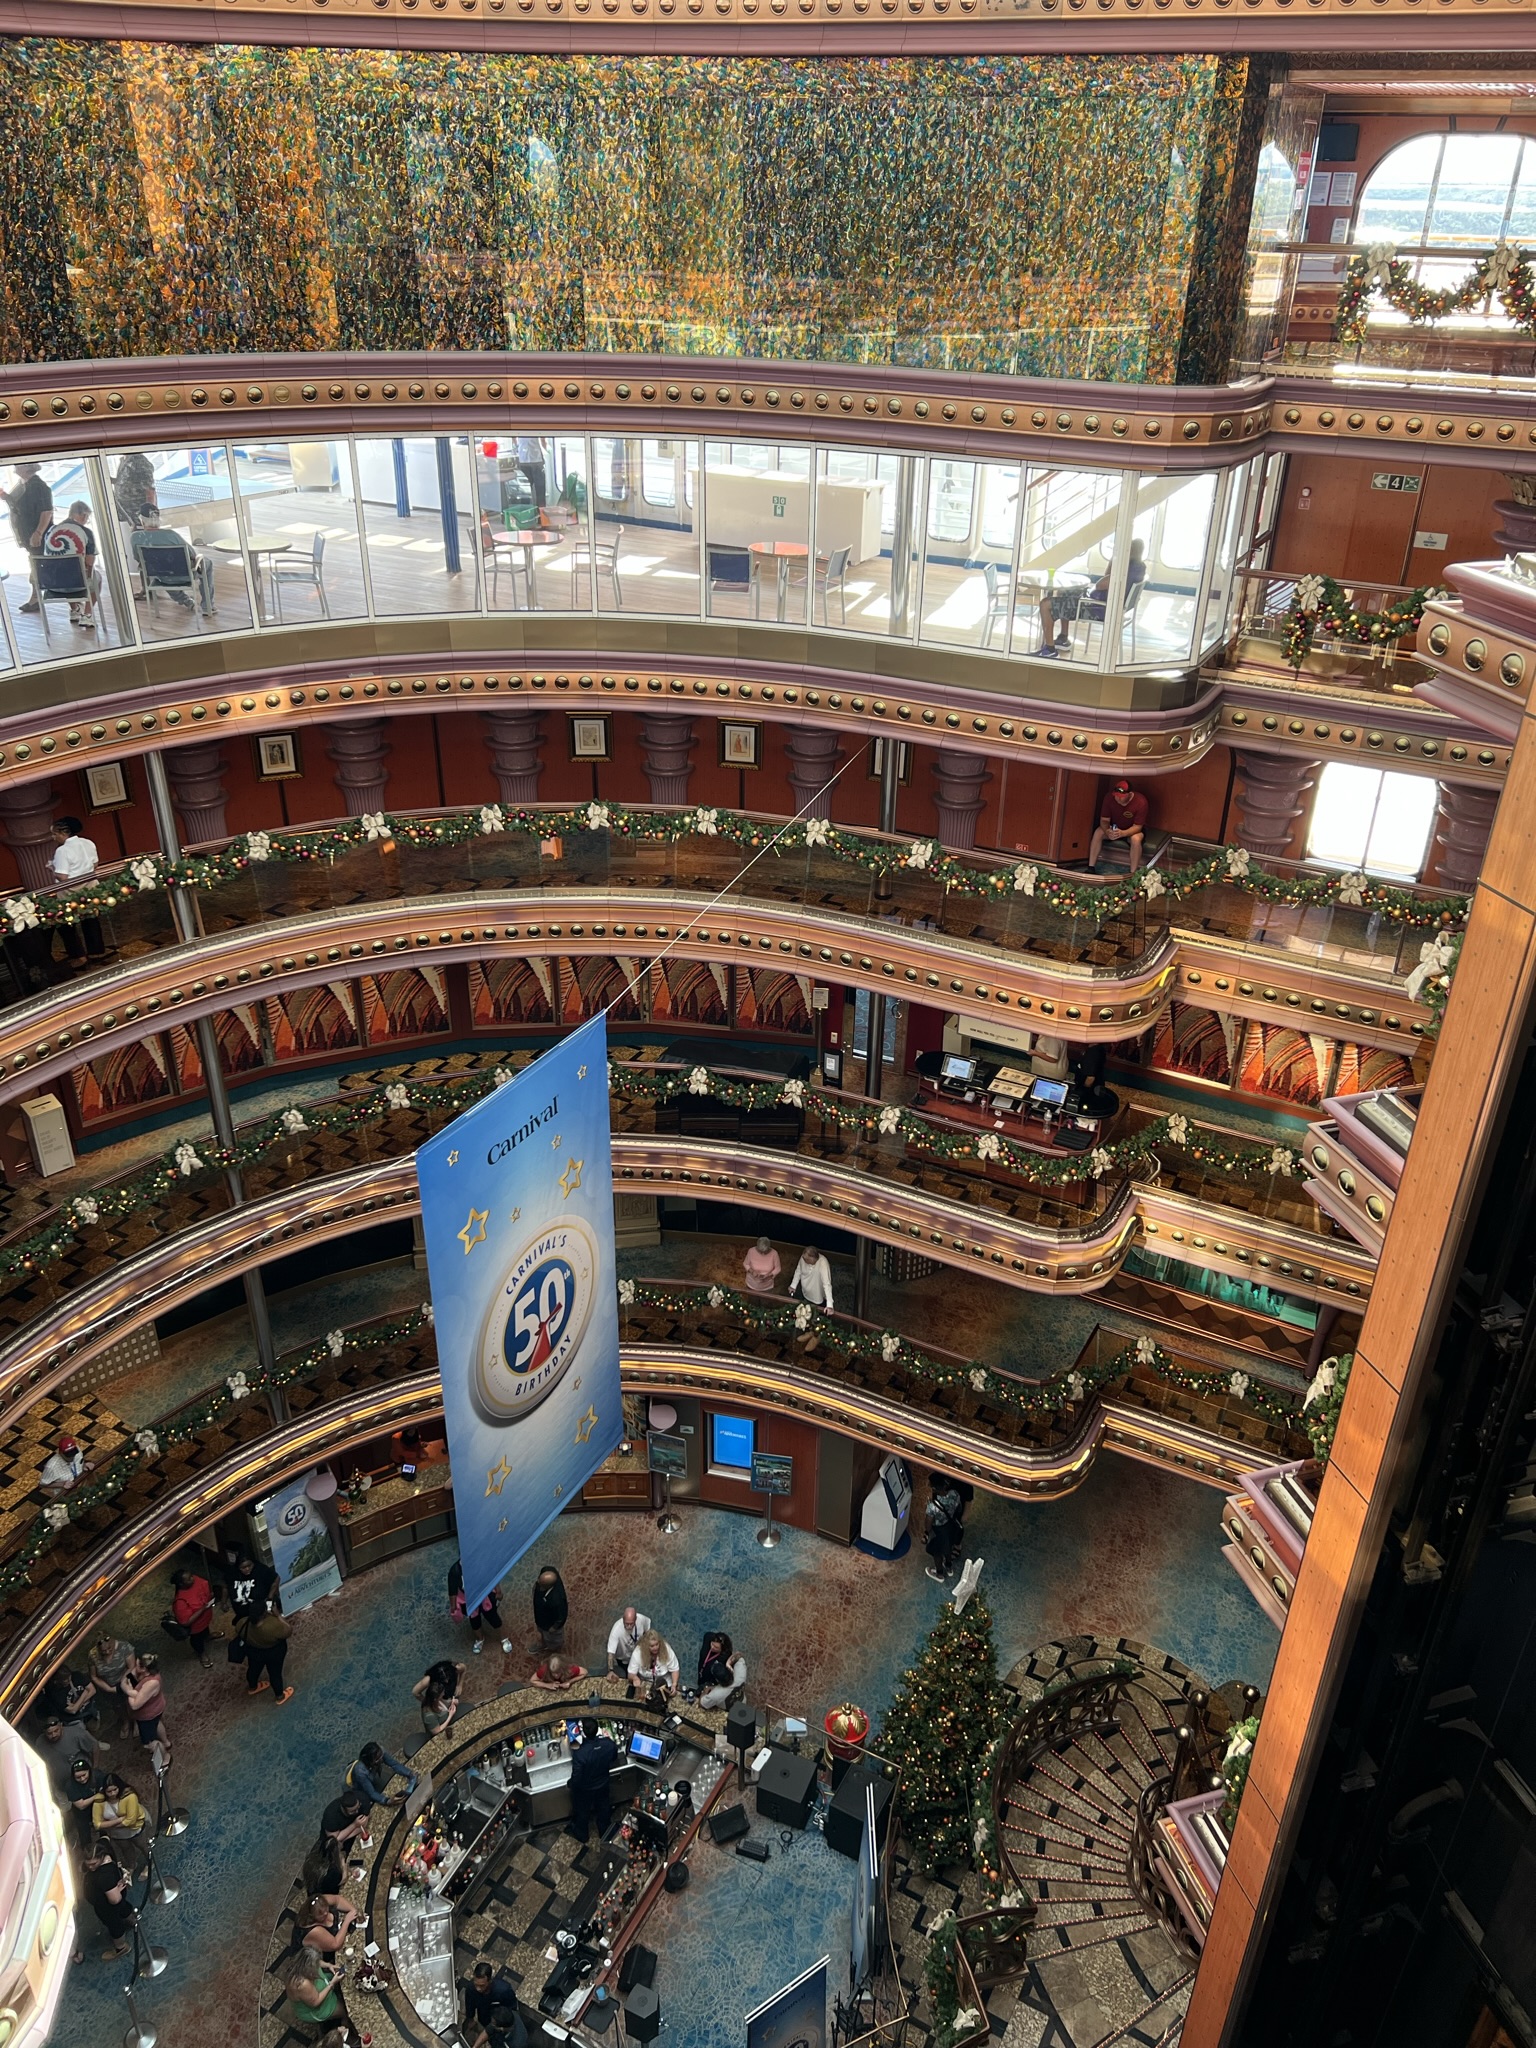 Cruise Shorts – It’s Christmas Time on the Carnival Elation and it is Snowing in the Atrium!